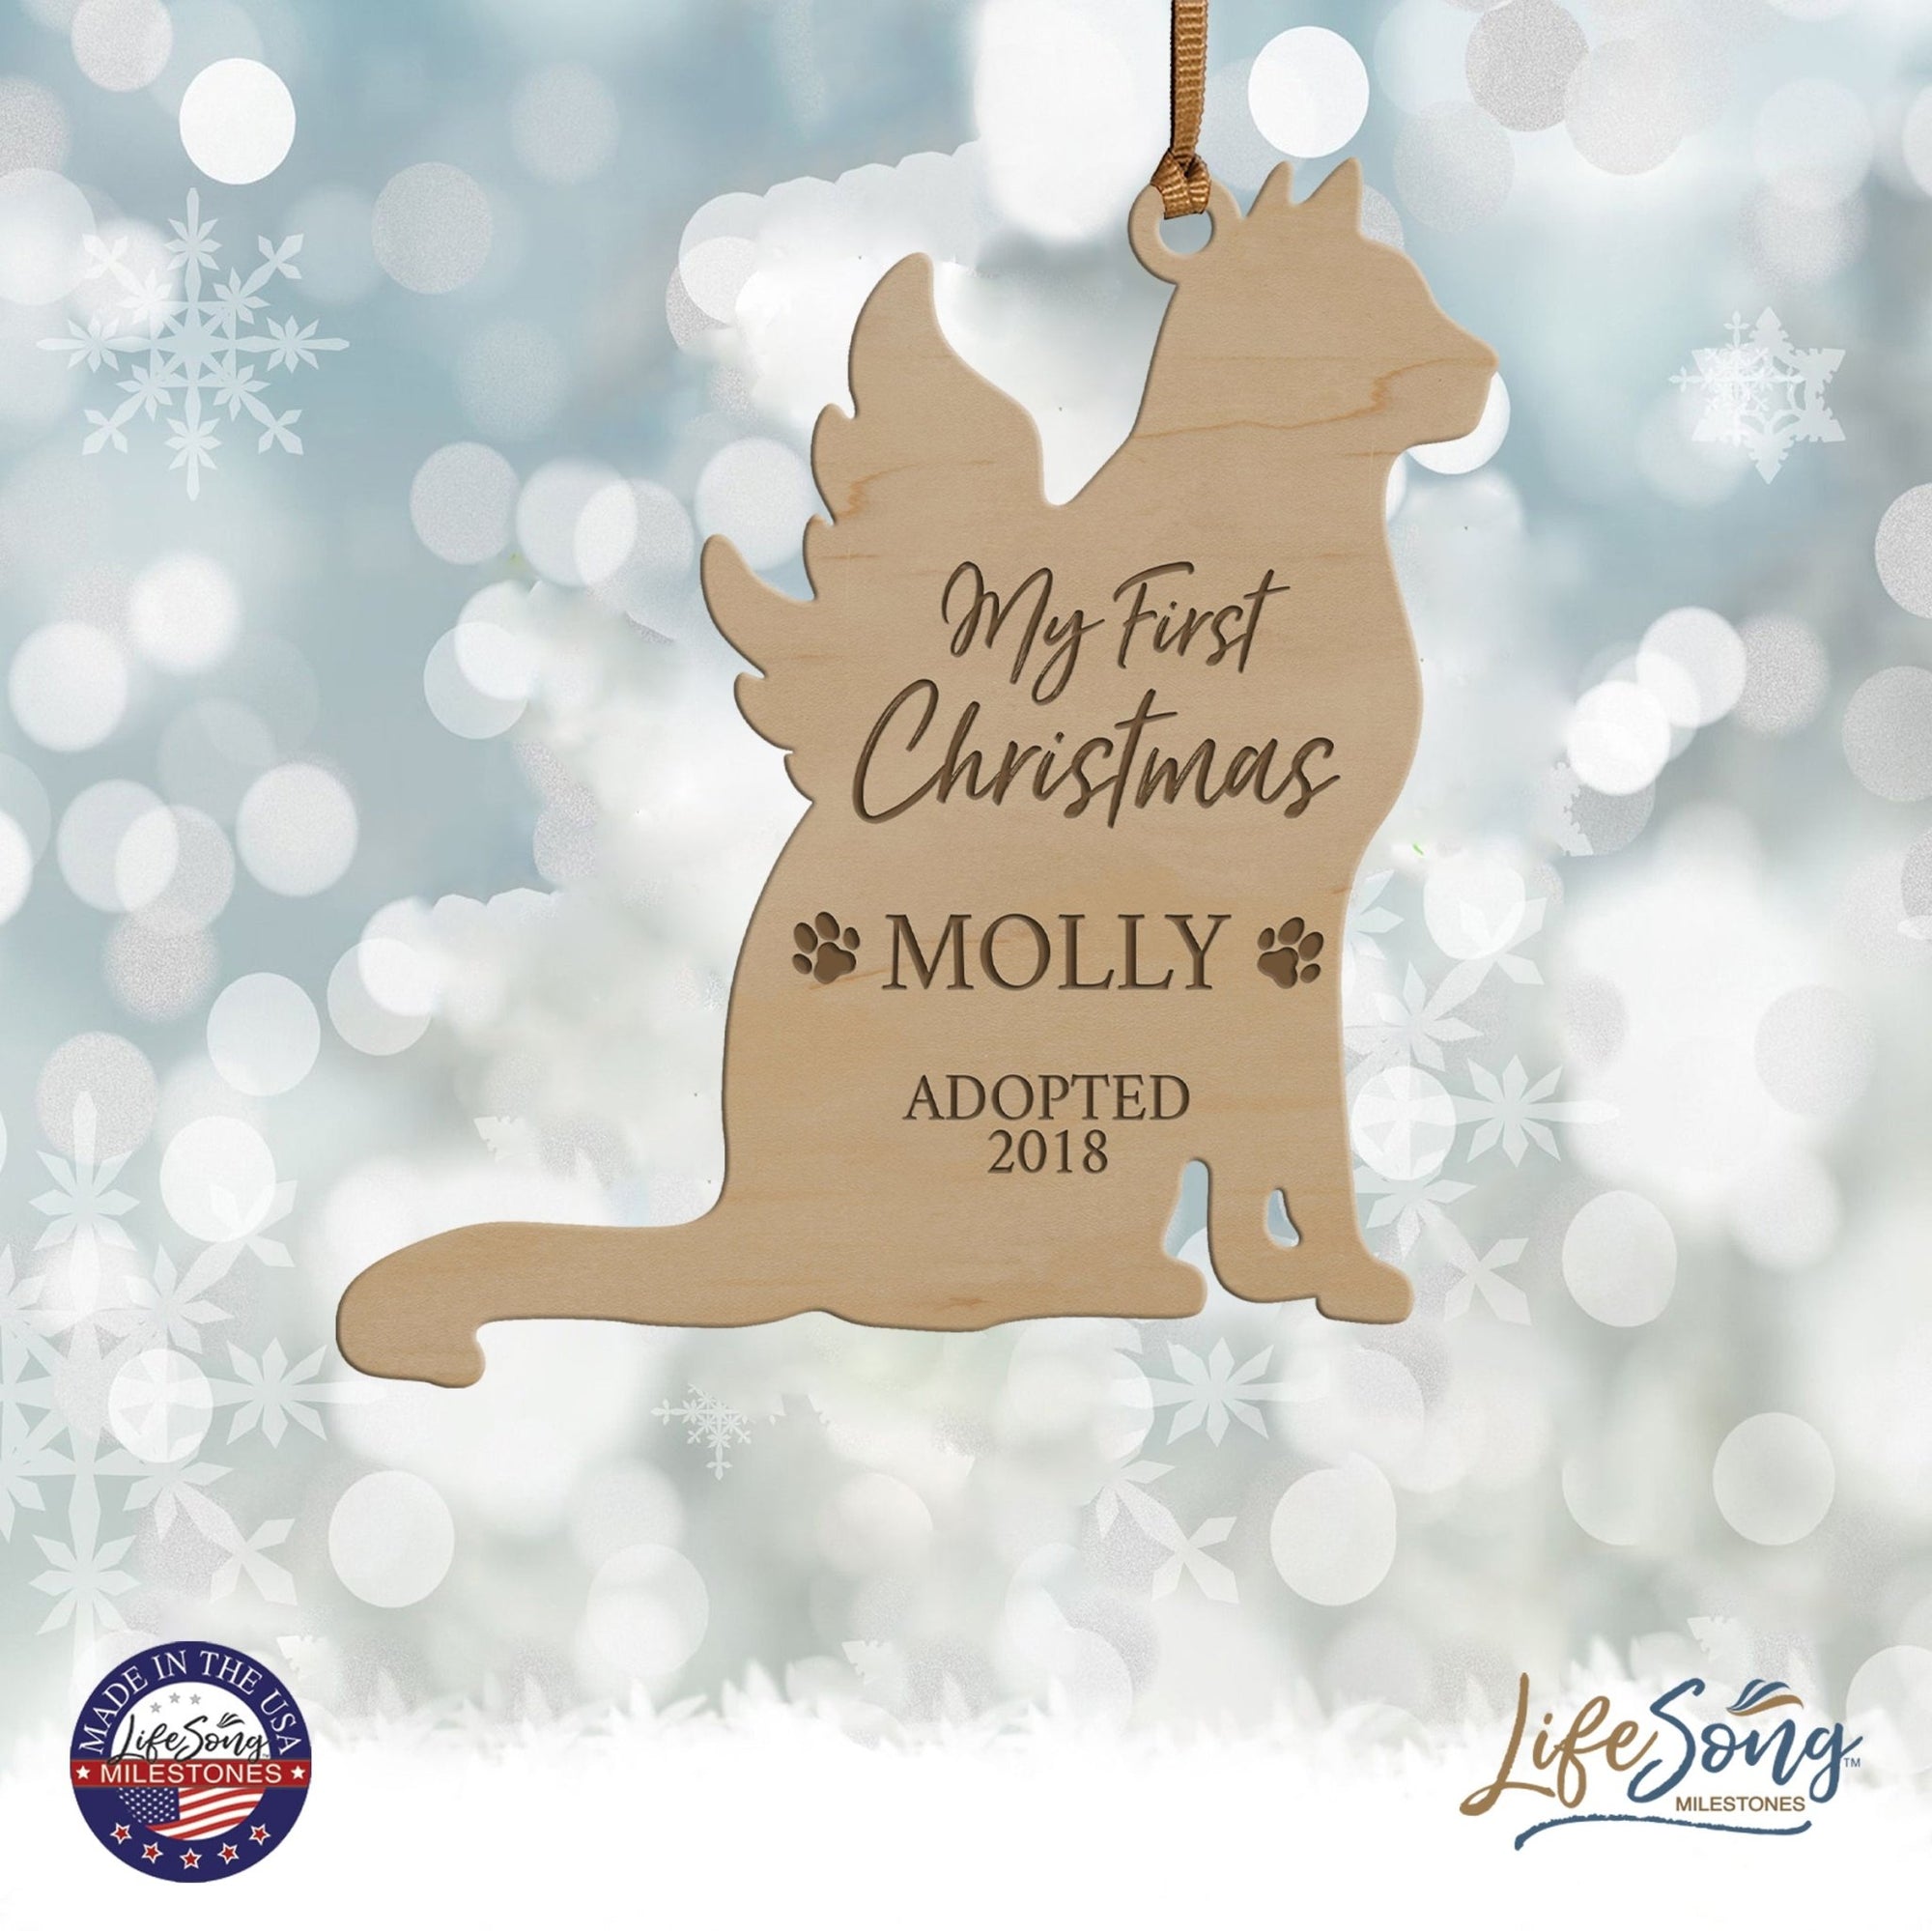 Personalized Engraved Christmas Cat Ornament 4.9375” x 5.375” x 0.125” - My first Christmas (PAWS) - LifeSong Milestones